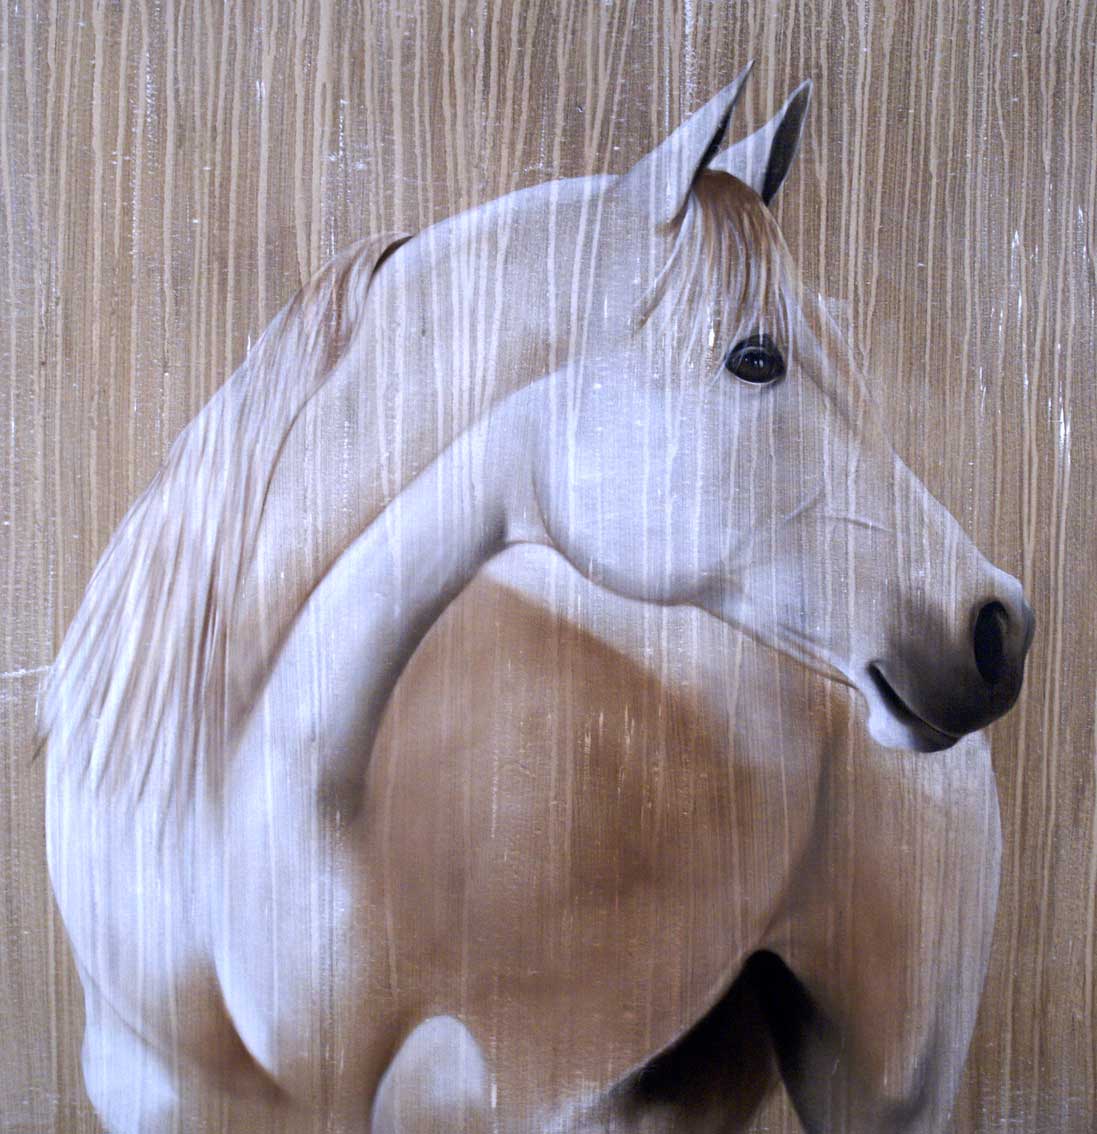 Pur-Sang-Arabe arabian-thoroughbred-horse Thierry Bisch Contemporary painter animals painting art decoration nature biodiversity conservation